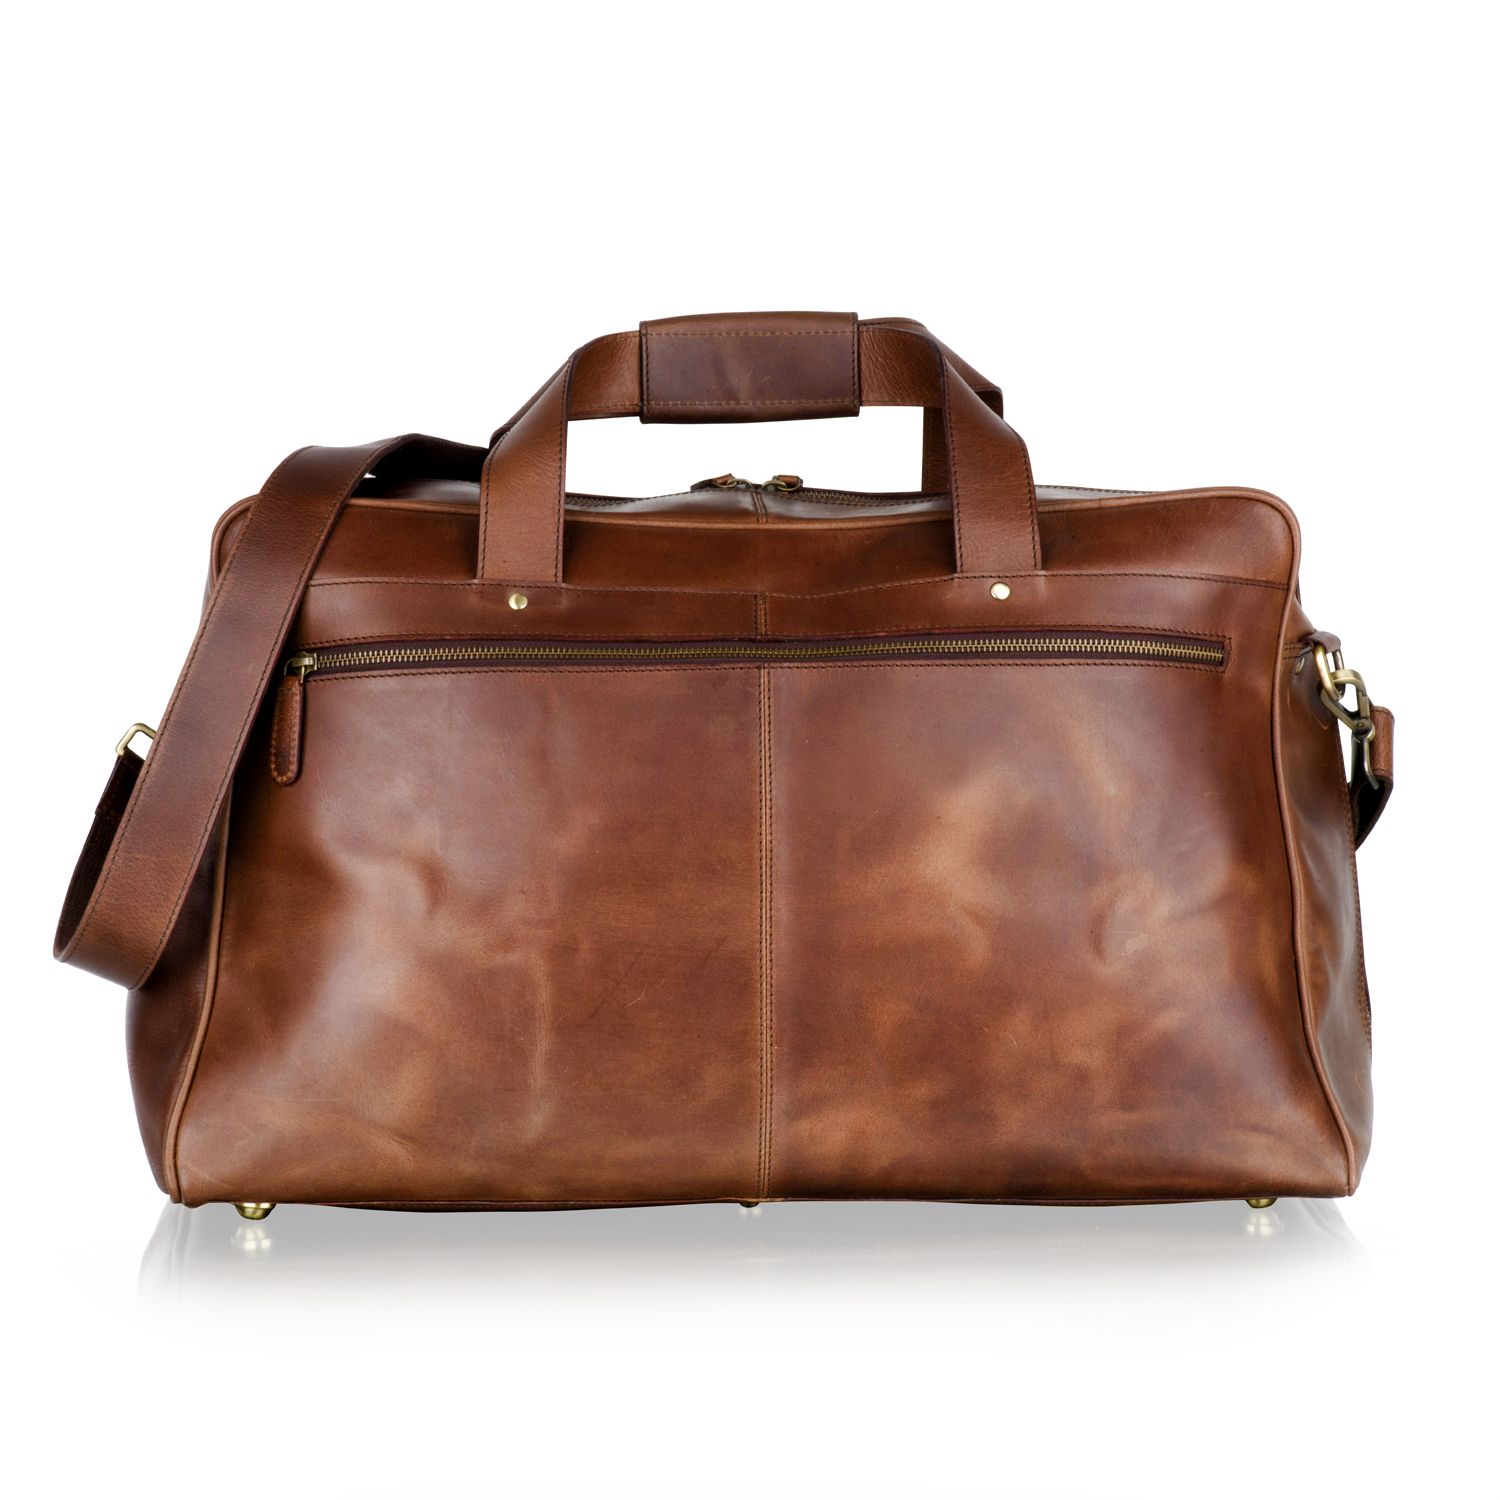 Woodland Leather Brown Large Travel Holdall 21.0